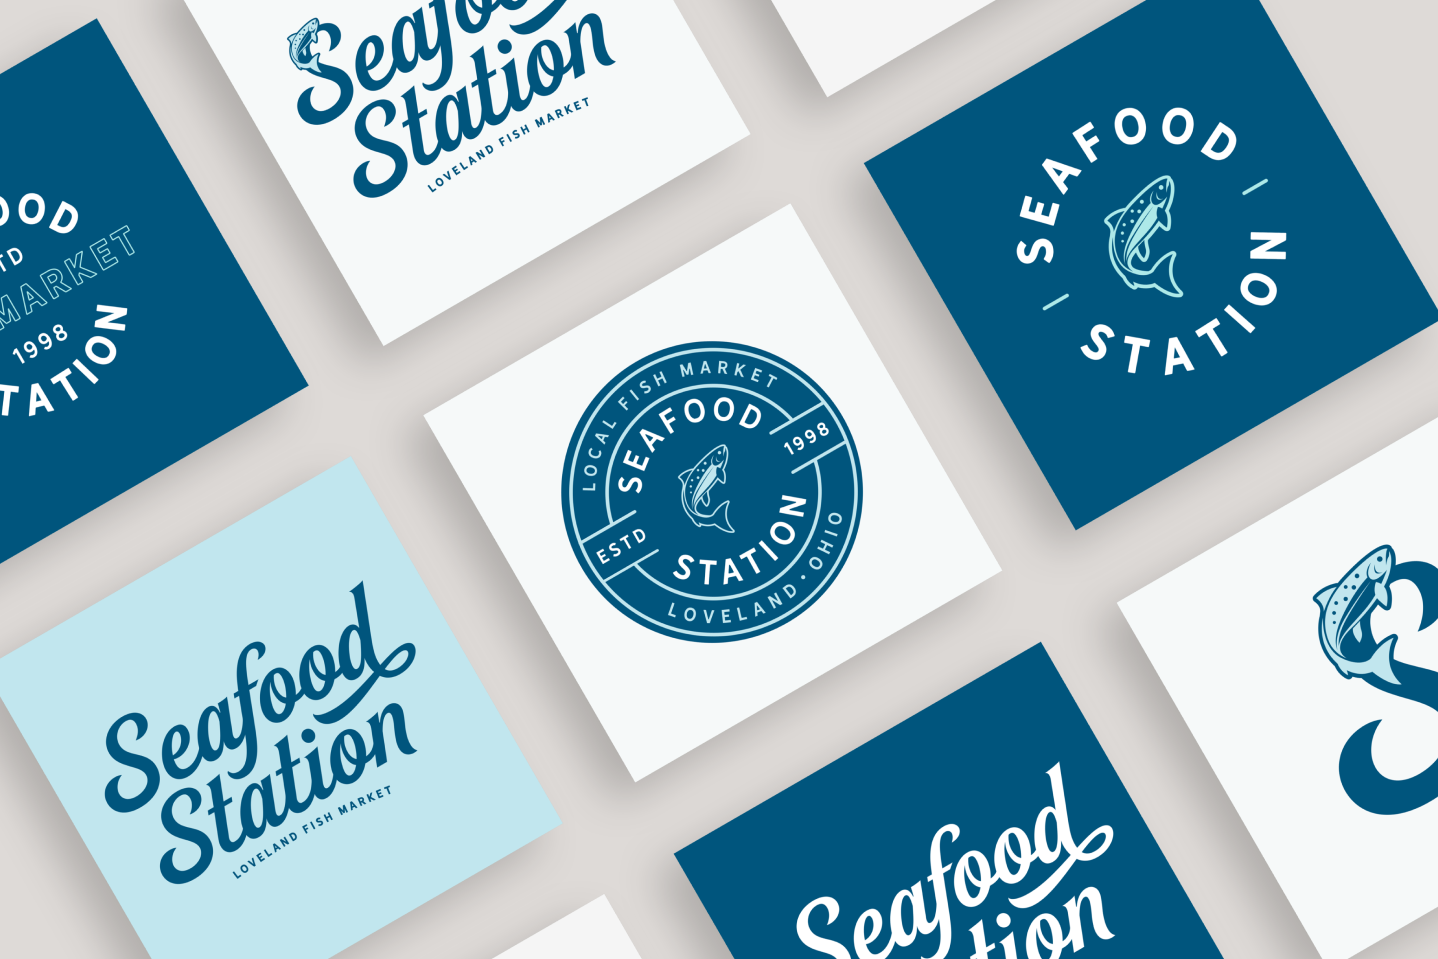 An image showing the variety of exploratory logo options Mertz Design Studio originally created for Seafood station.